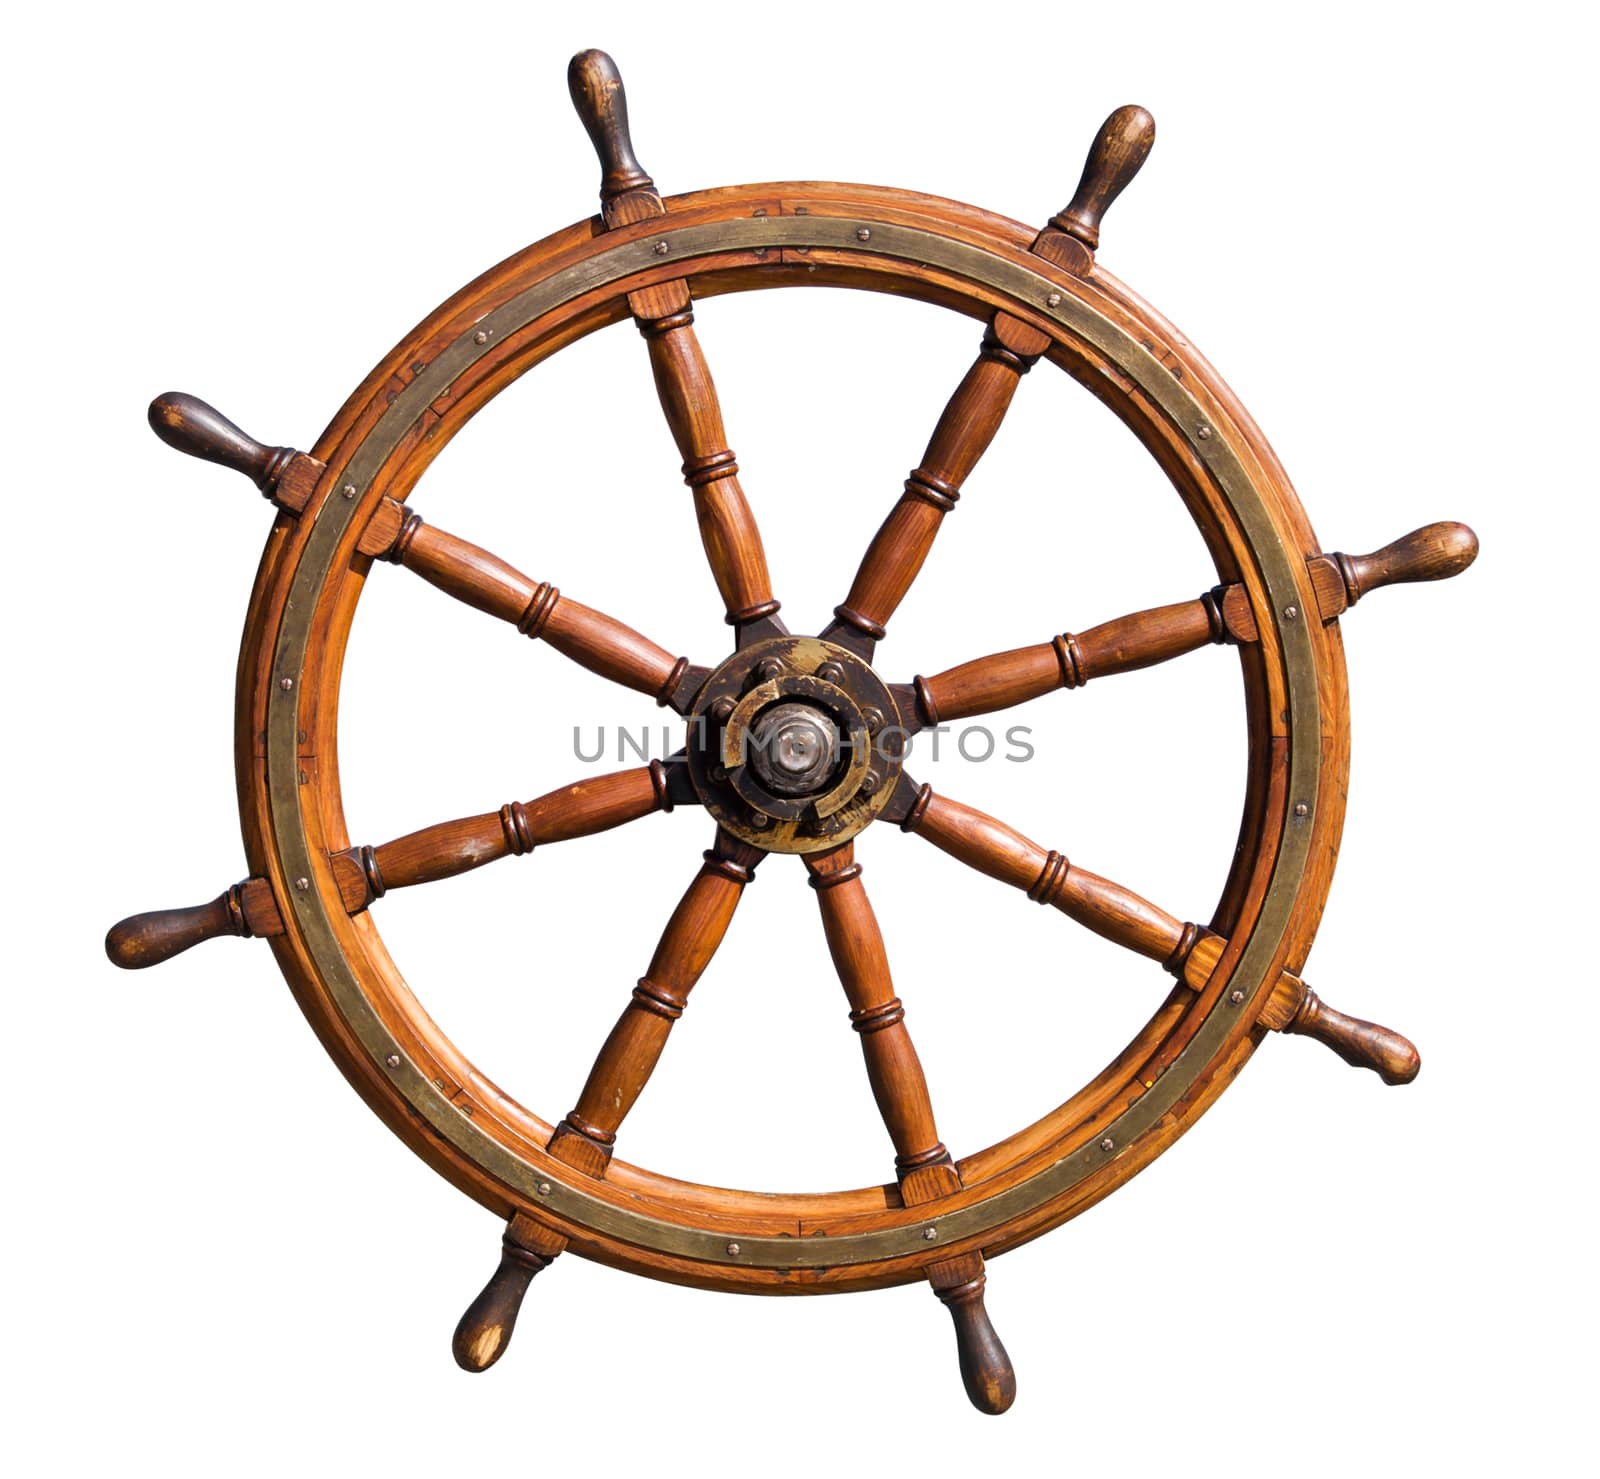 Old seasoned boat steering wheel isolated on white background. Useful for leadership and skilful management concepts.